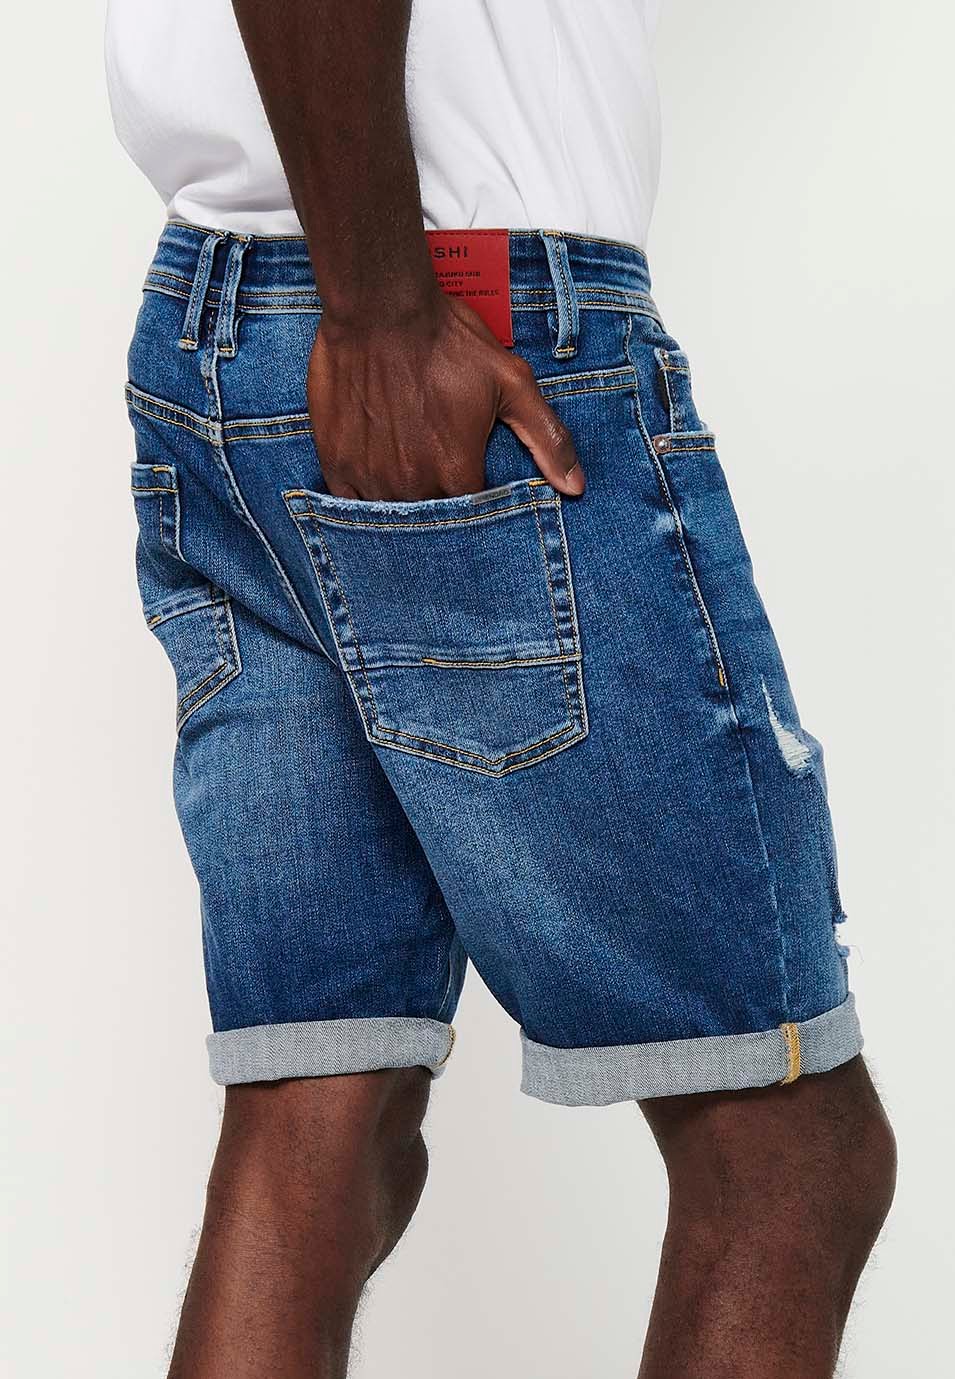 Shorts with turn-up finish and front zipper and button closure with five pockets, one blue pocket pocket for Men 9